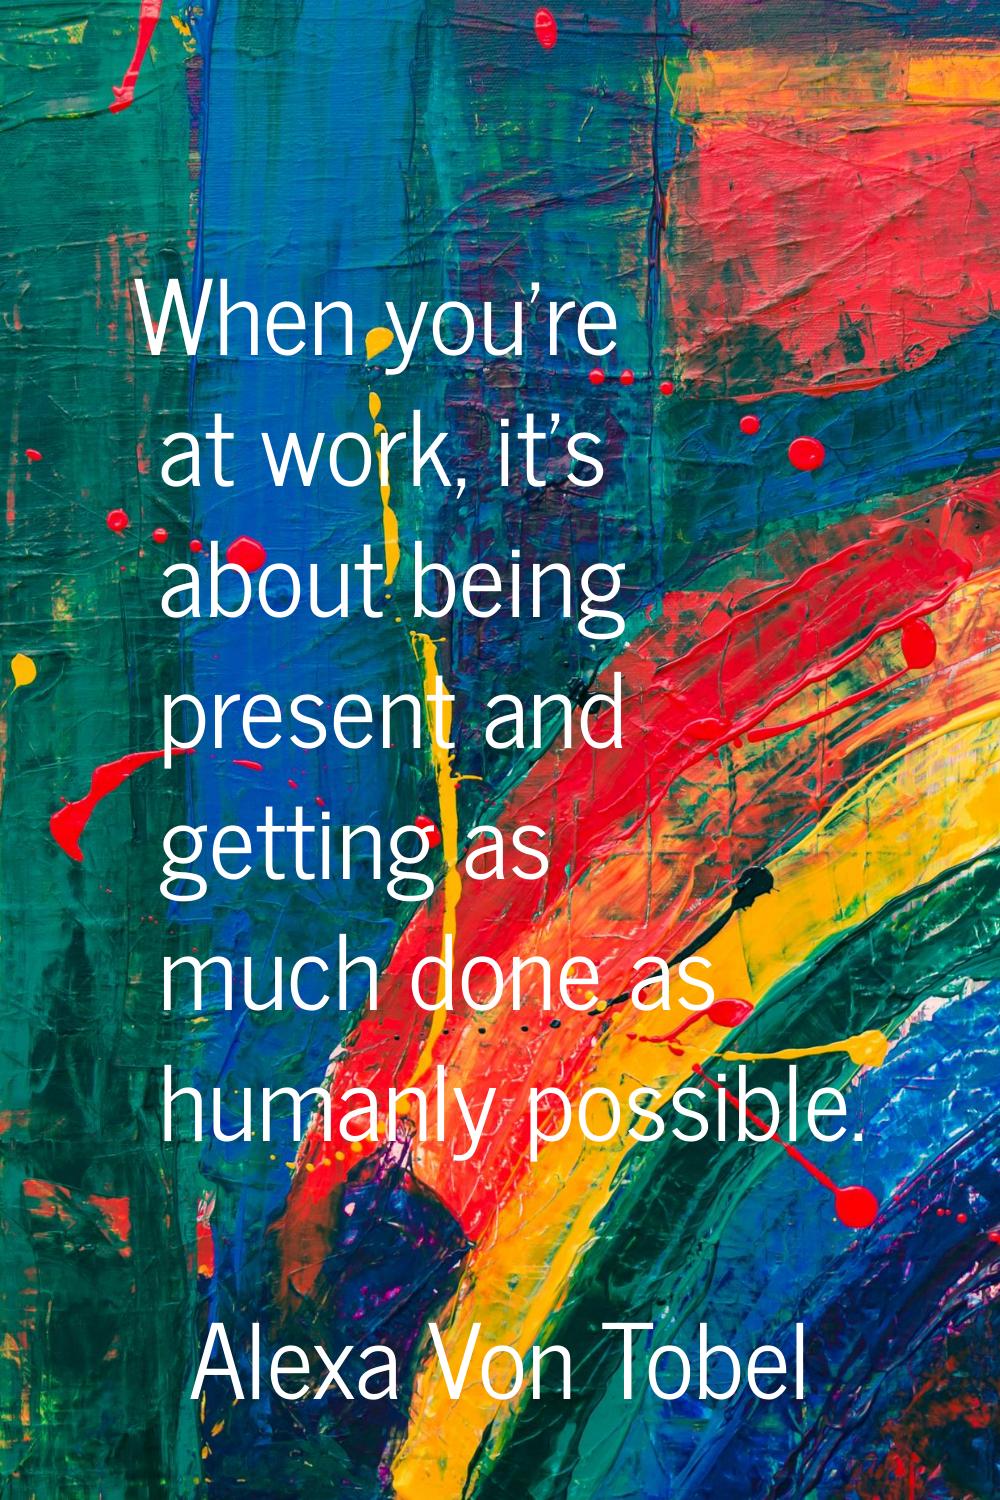 When you're at work, it's about being present and getting as much done as humanly possible.